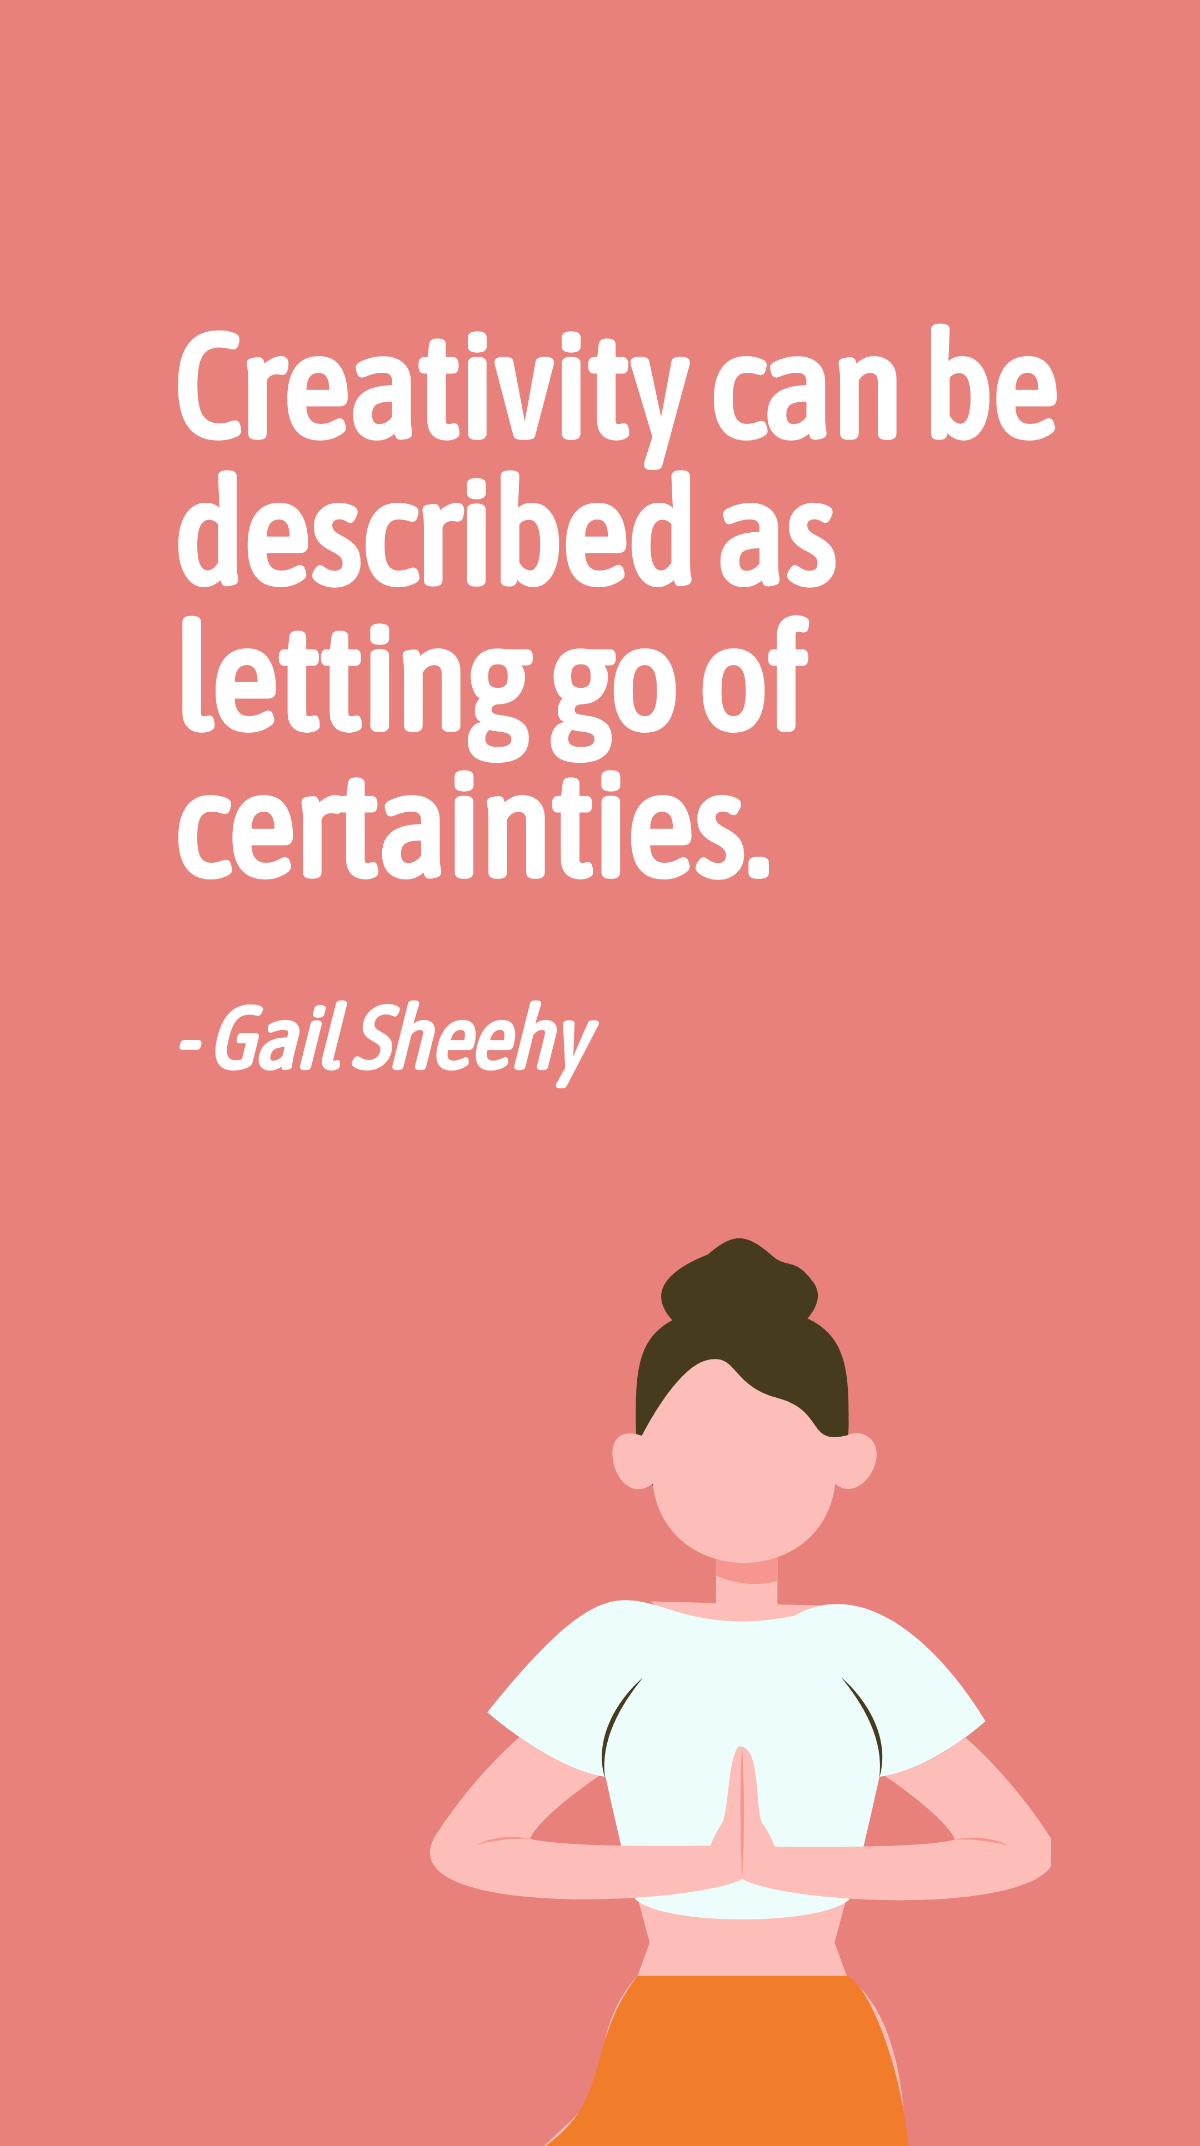 Gail Sheehy - Creativity can be described as letting go of certainties.